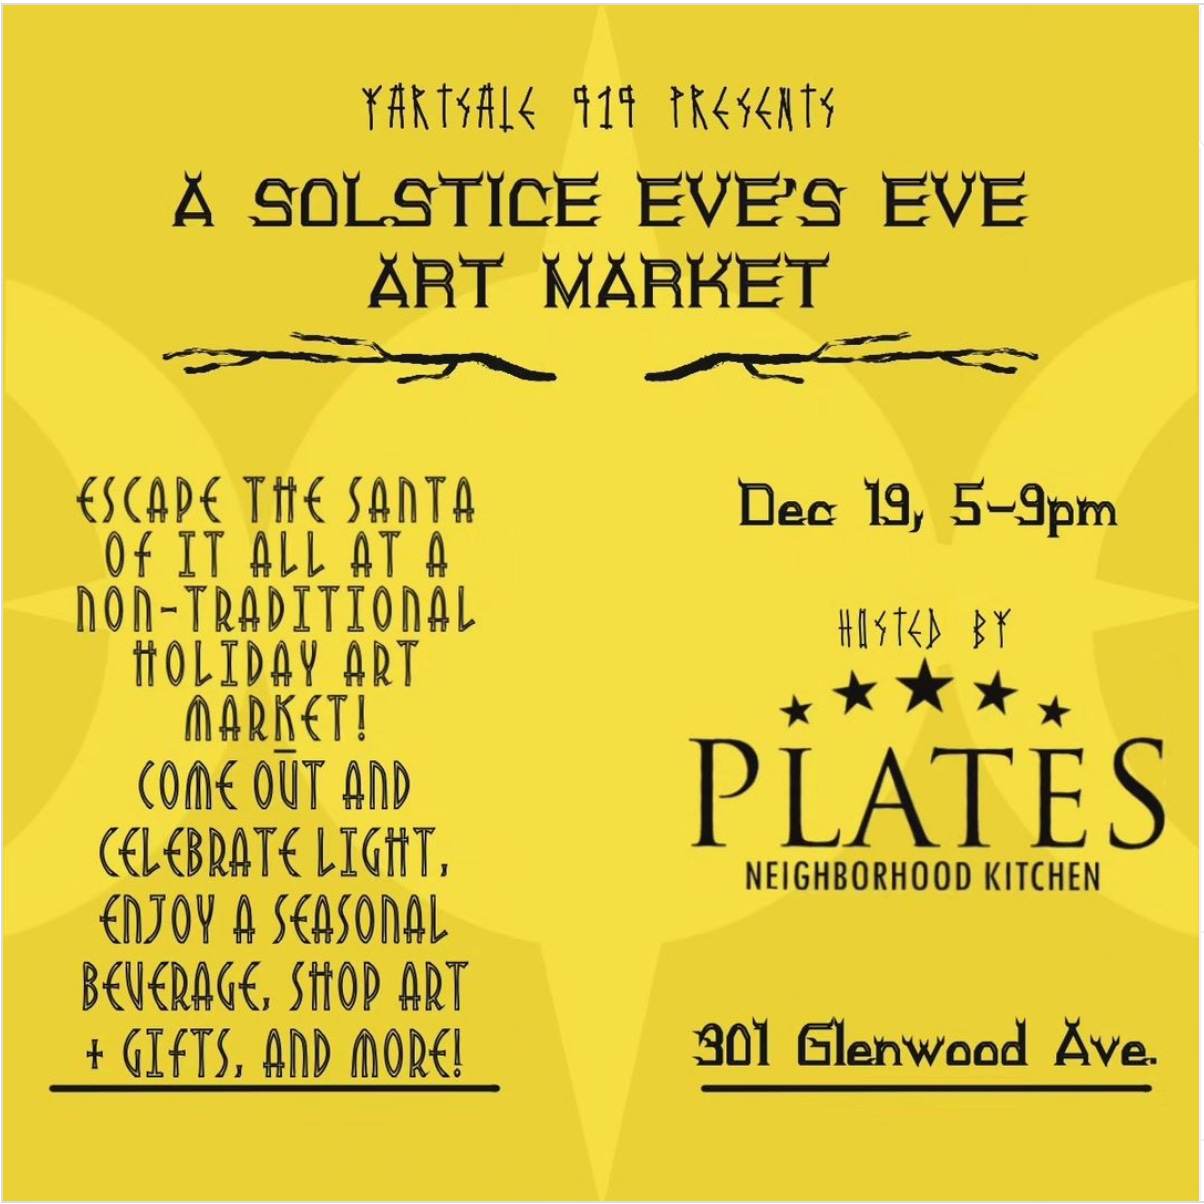 Promo post for Yartsale's Solstice Market at Plates, on Dec. 19 from 5-9 pm at 301 Glenwood Ave.